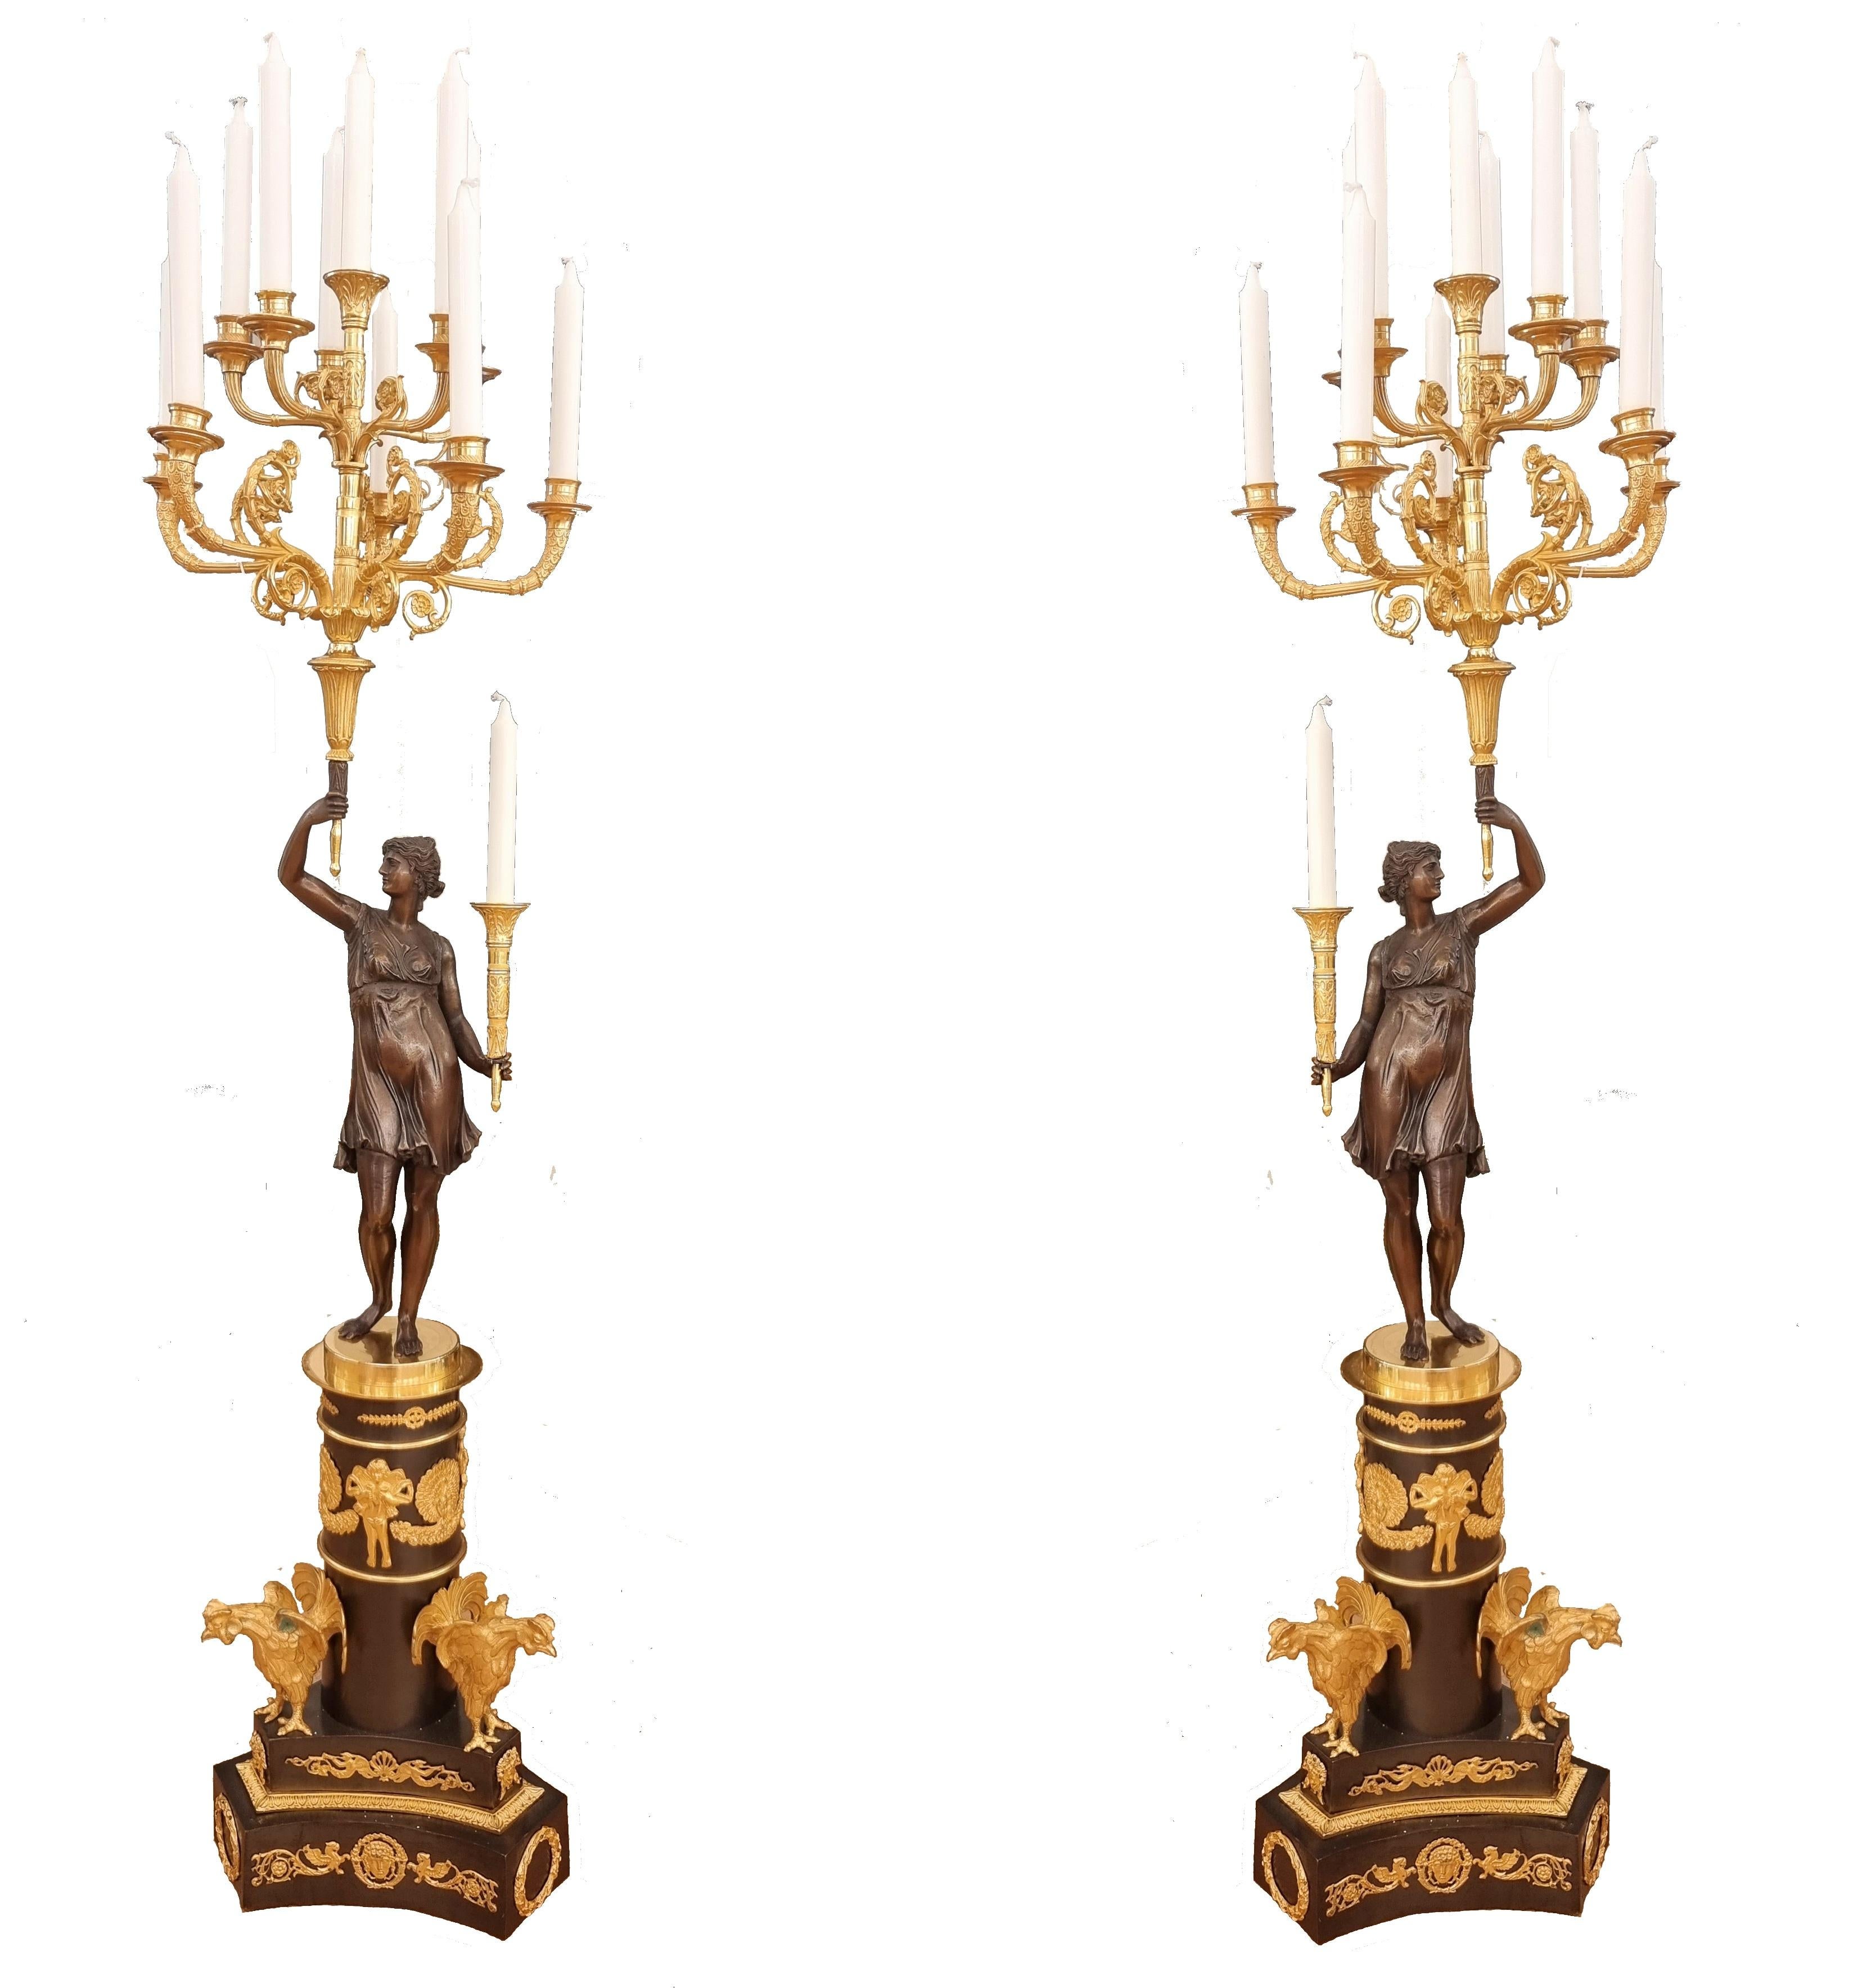 Late 19th century bronze candelabras with sixteen lights
Gilded branches held by a dark bronze lady. The tripod base holds a black column with delicate gilded bronze pieces and three beautiful birds . This pair is of exceptional condition. my